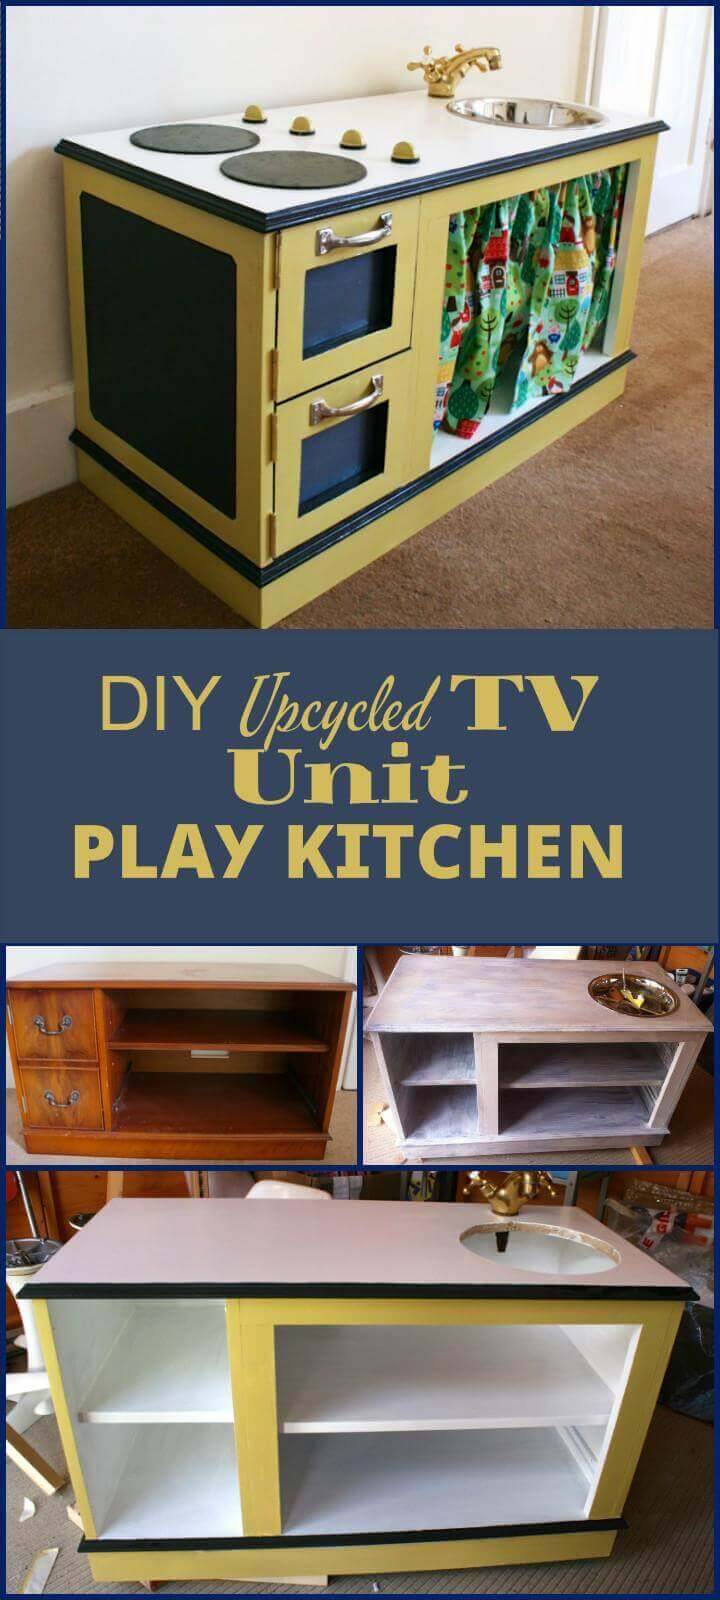 Recycled TV unit into Kids Play Kitchen